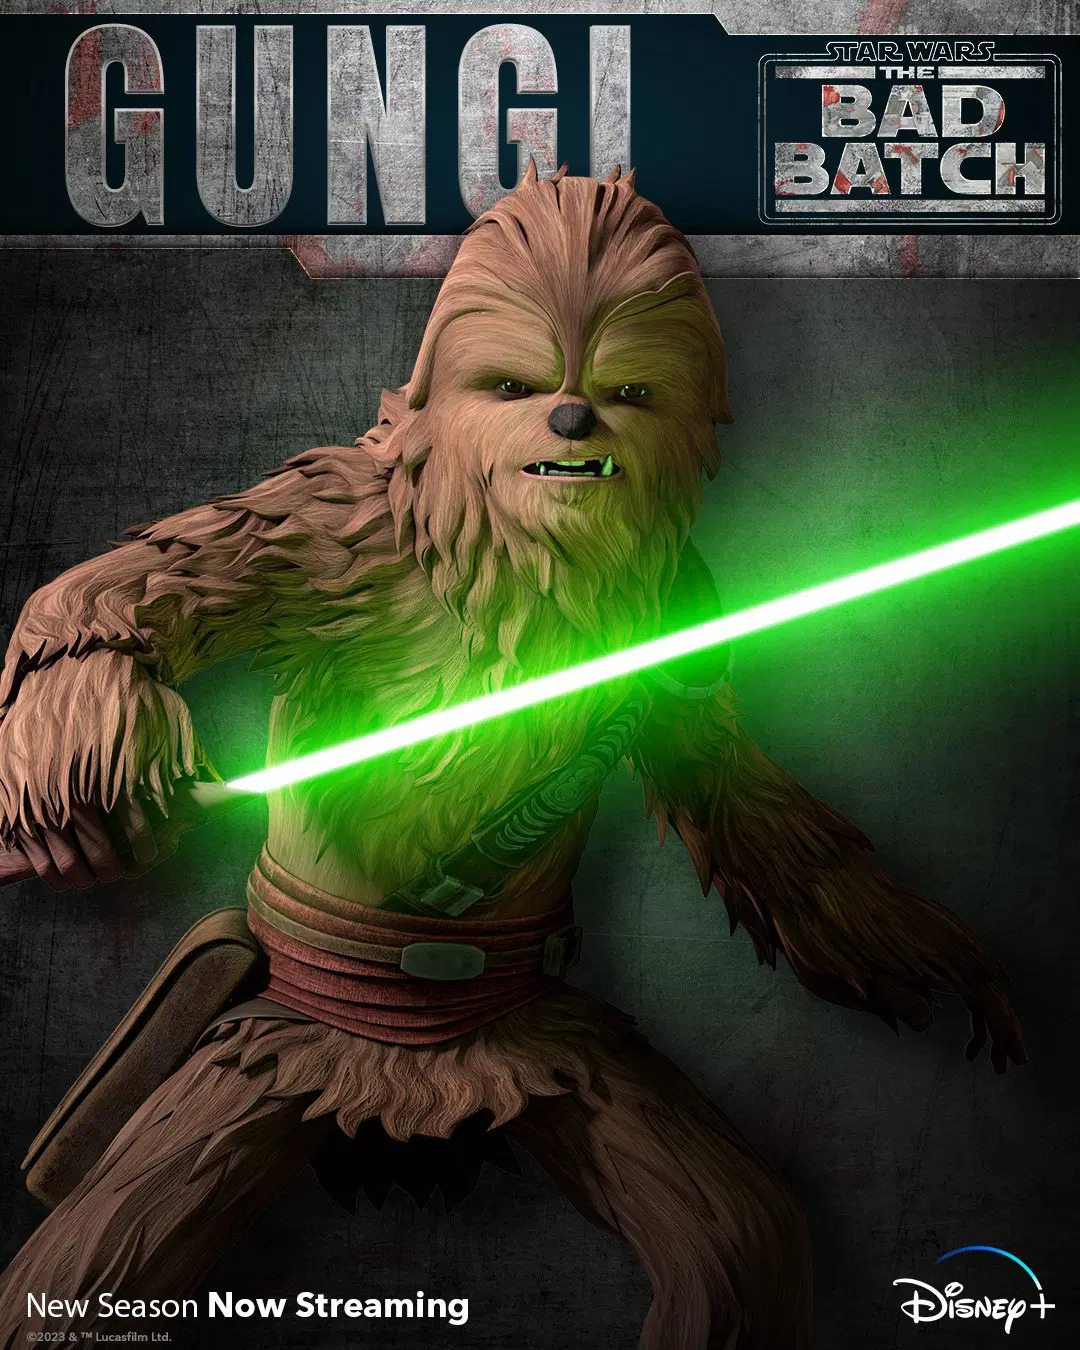 Extra Large Movie Poster Image for Star Wars: The Bad Batch (#35 of 43)